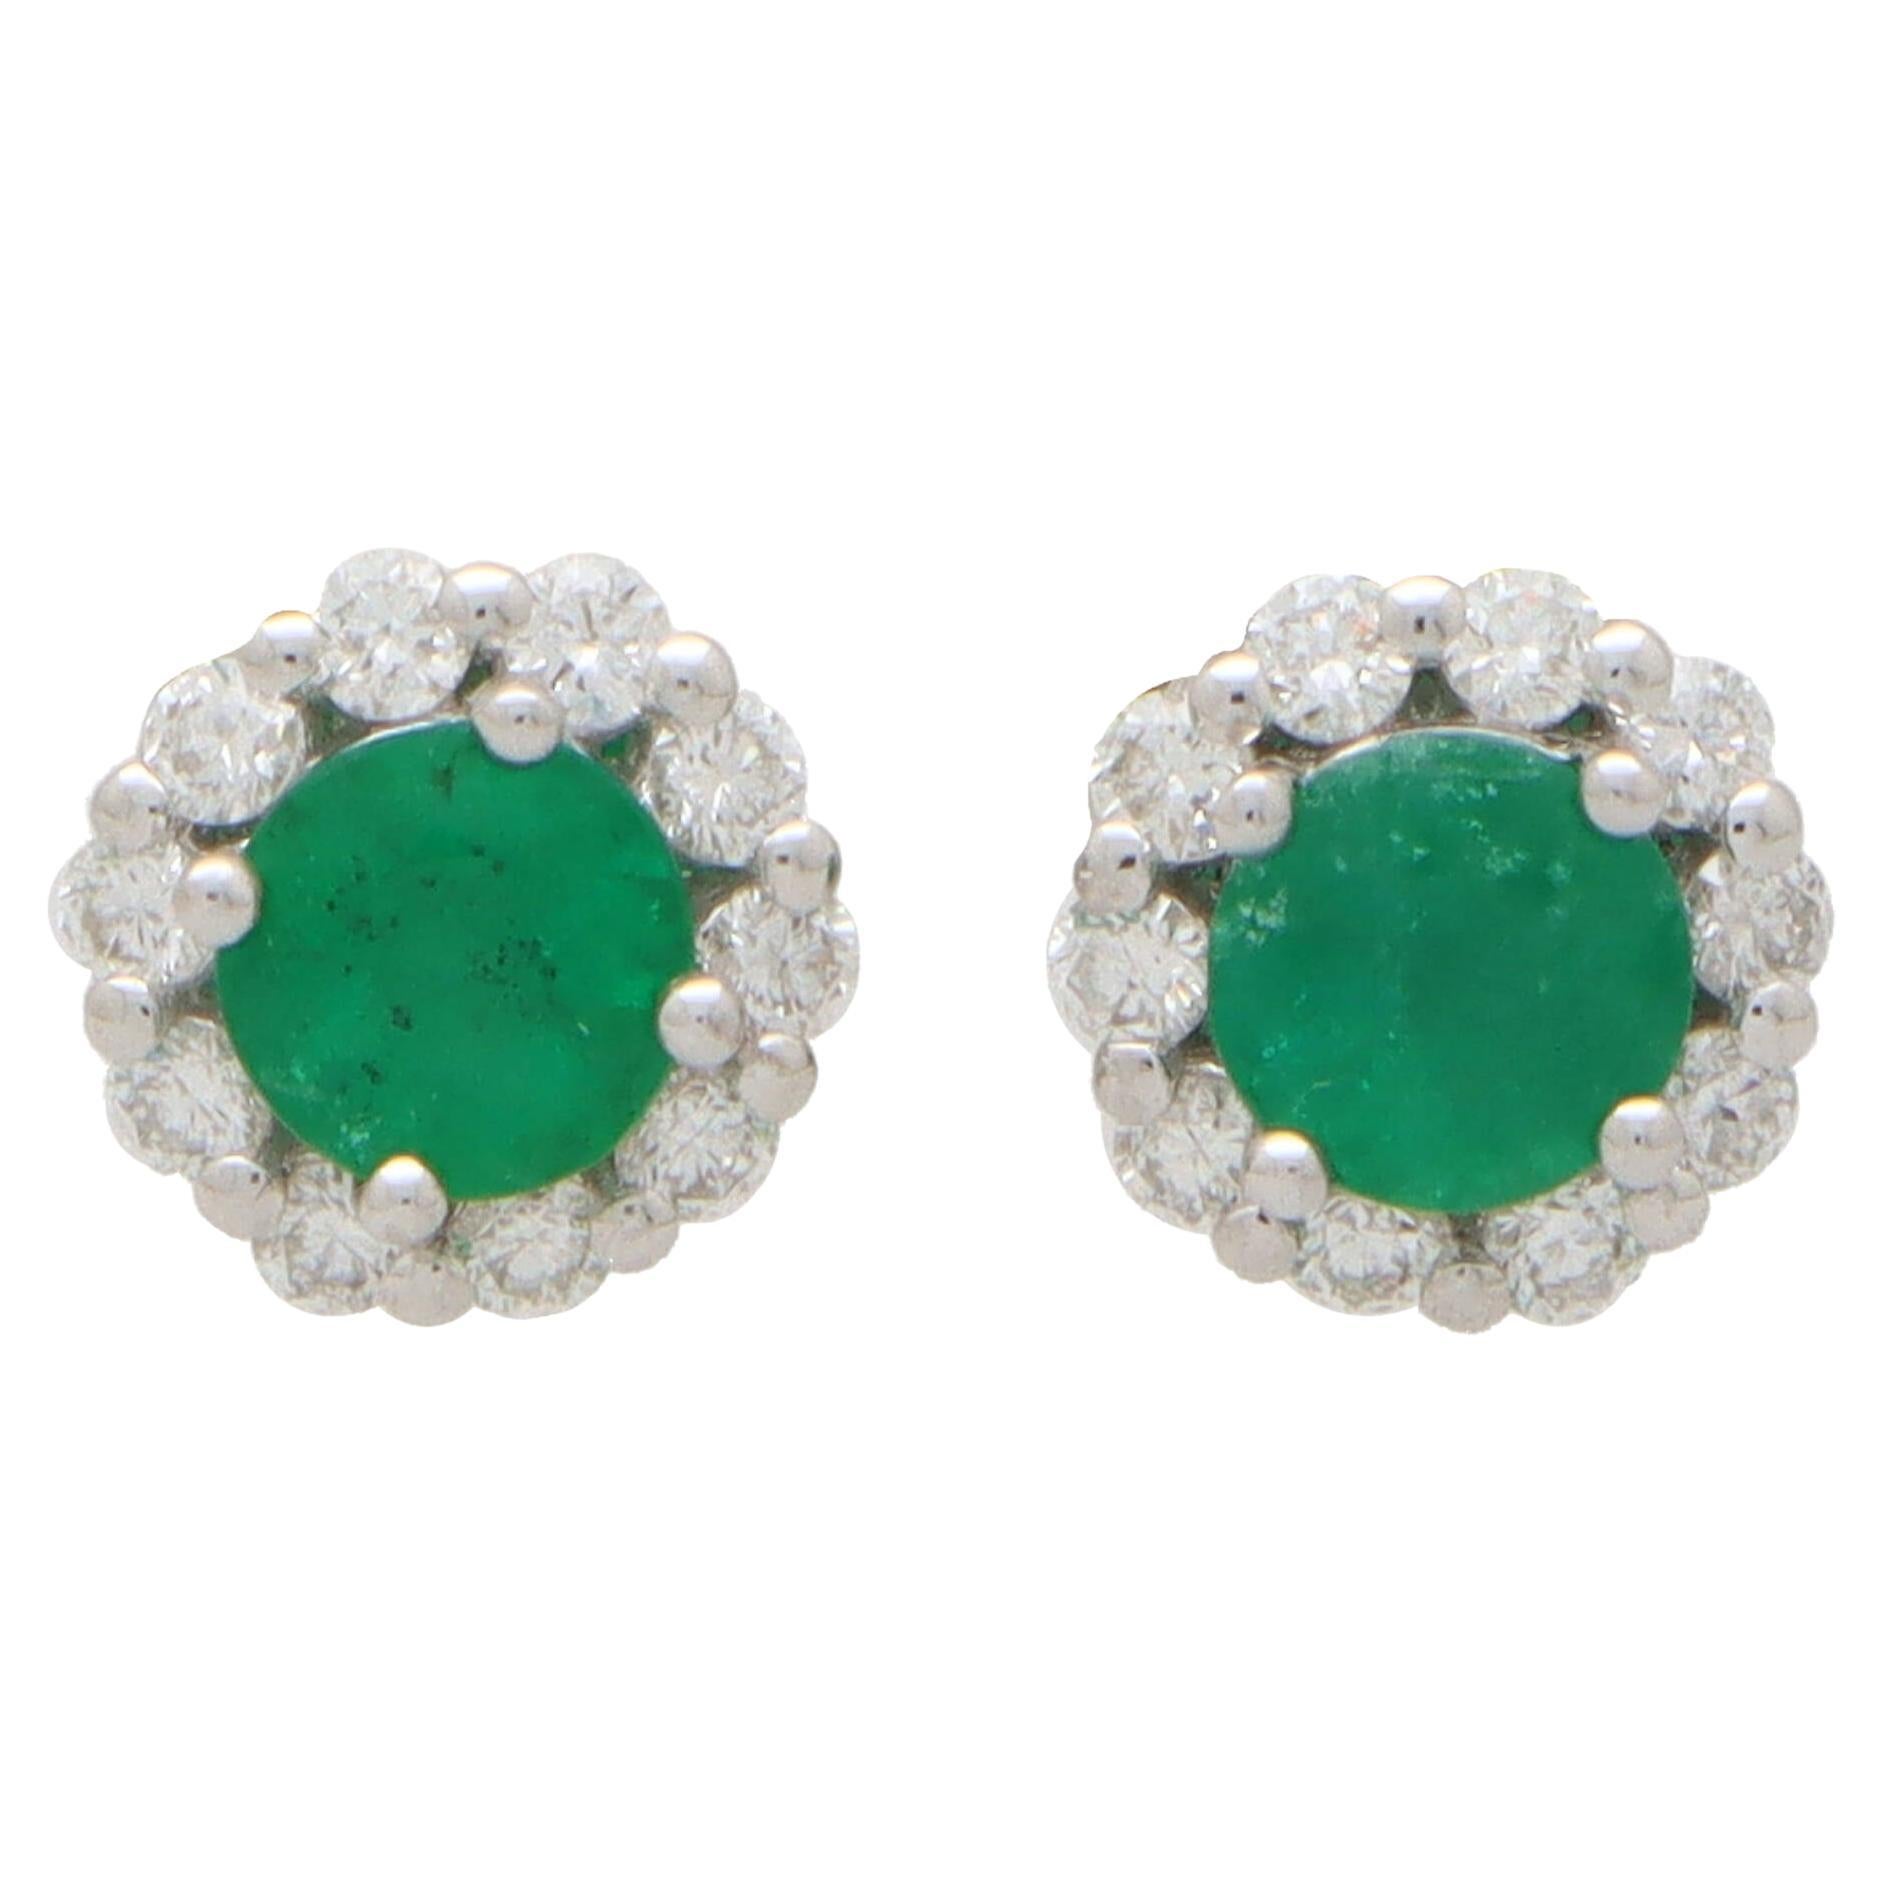 Contemporary Emerald and Diamond Floral Cluster Earrings in 18k White Gold